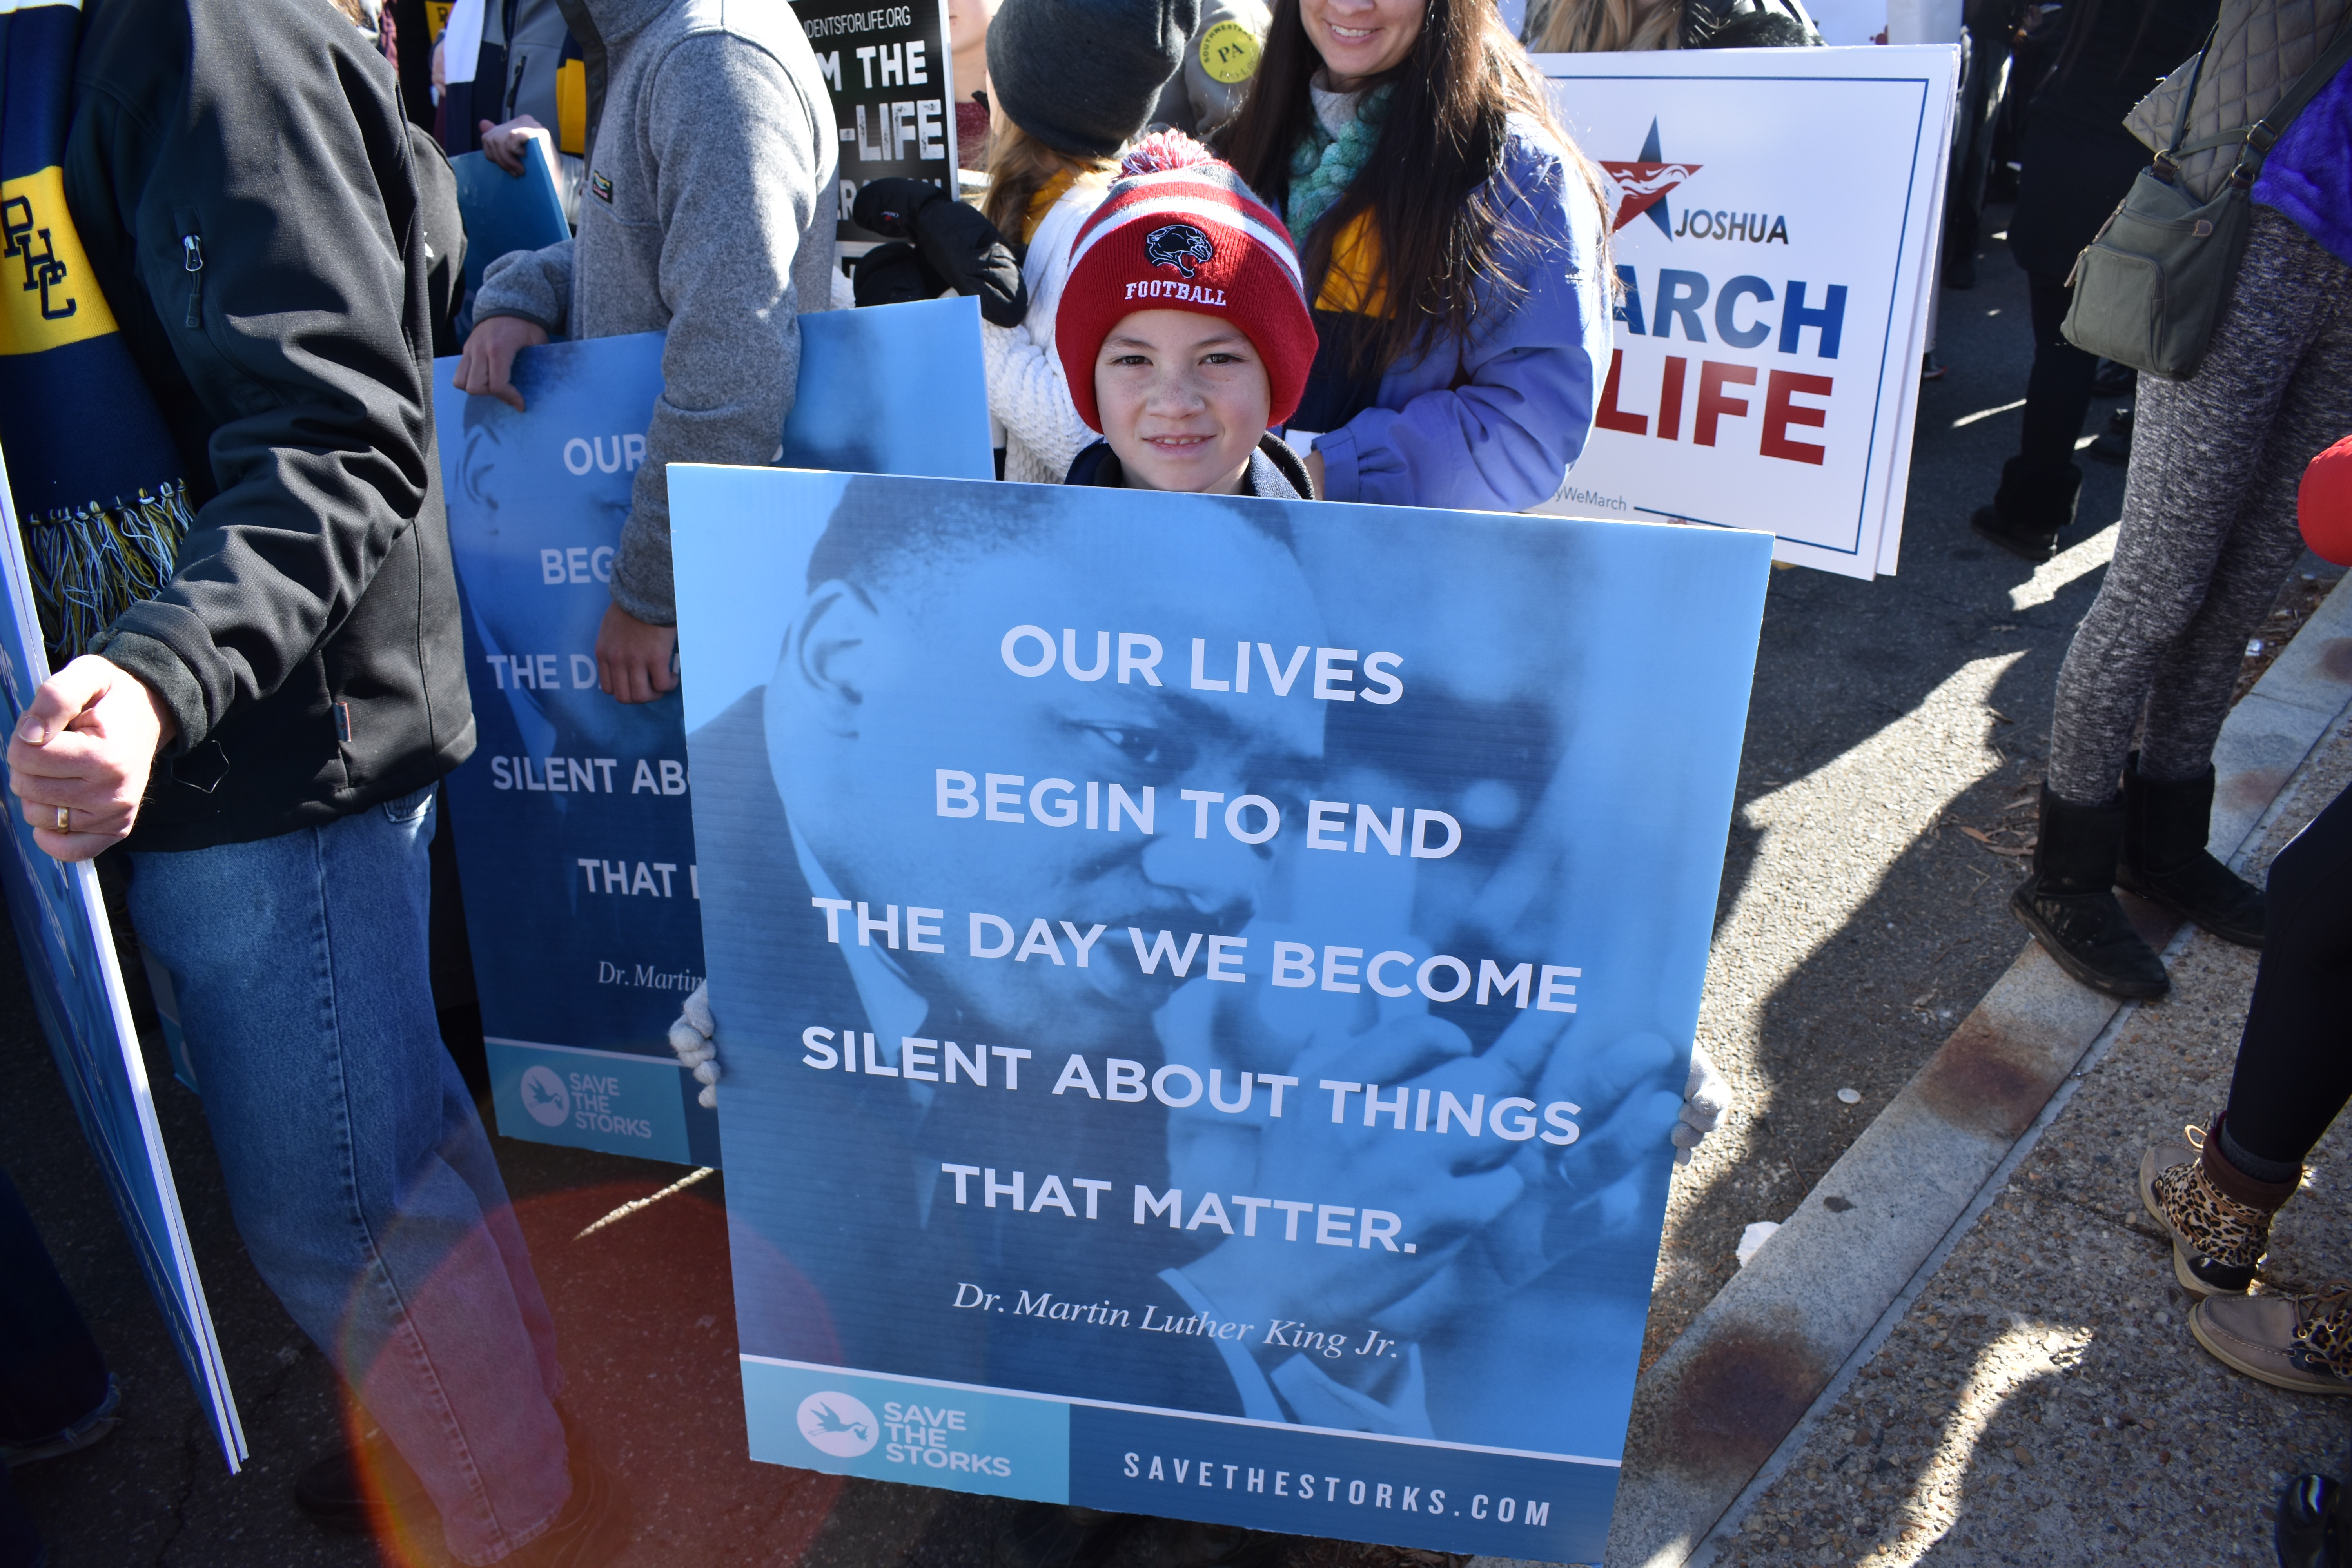 Leading the March for Life